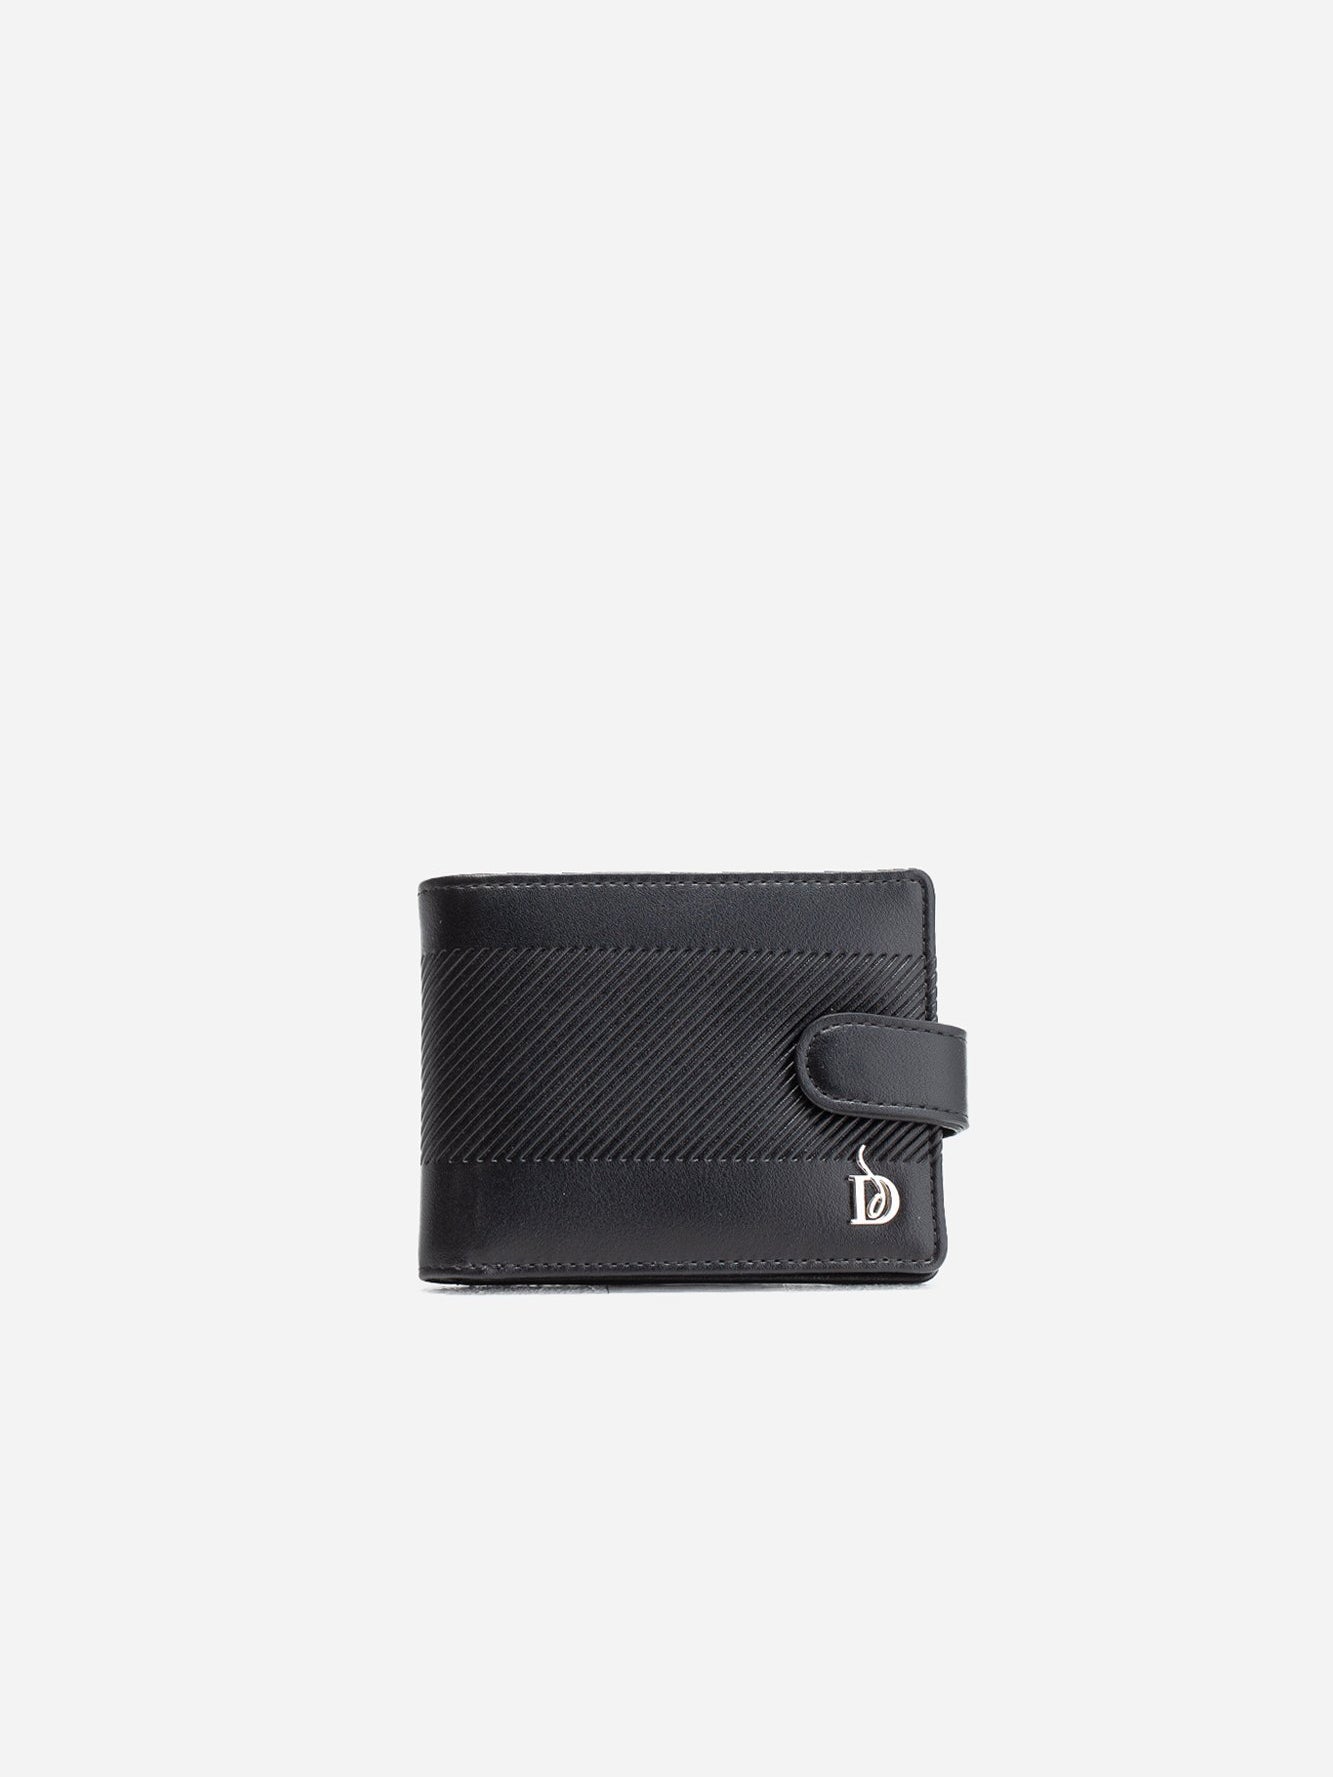 Daly Dress Mens Buttoned Wallet